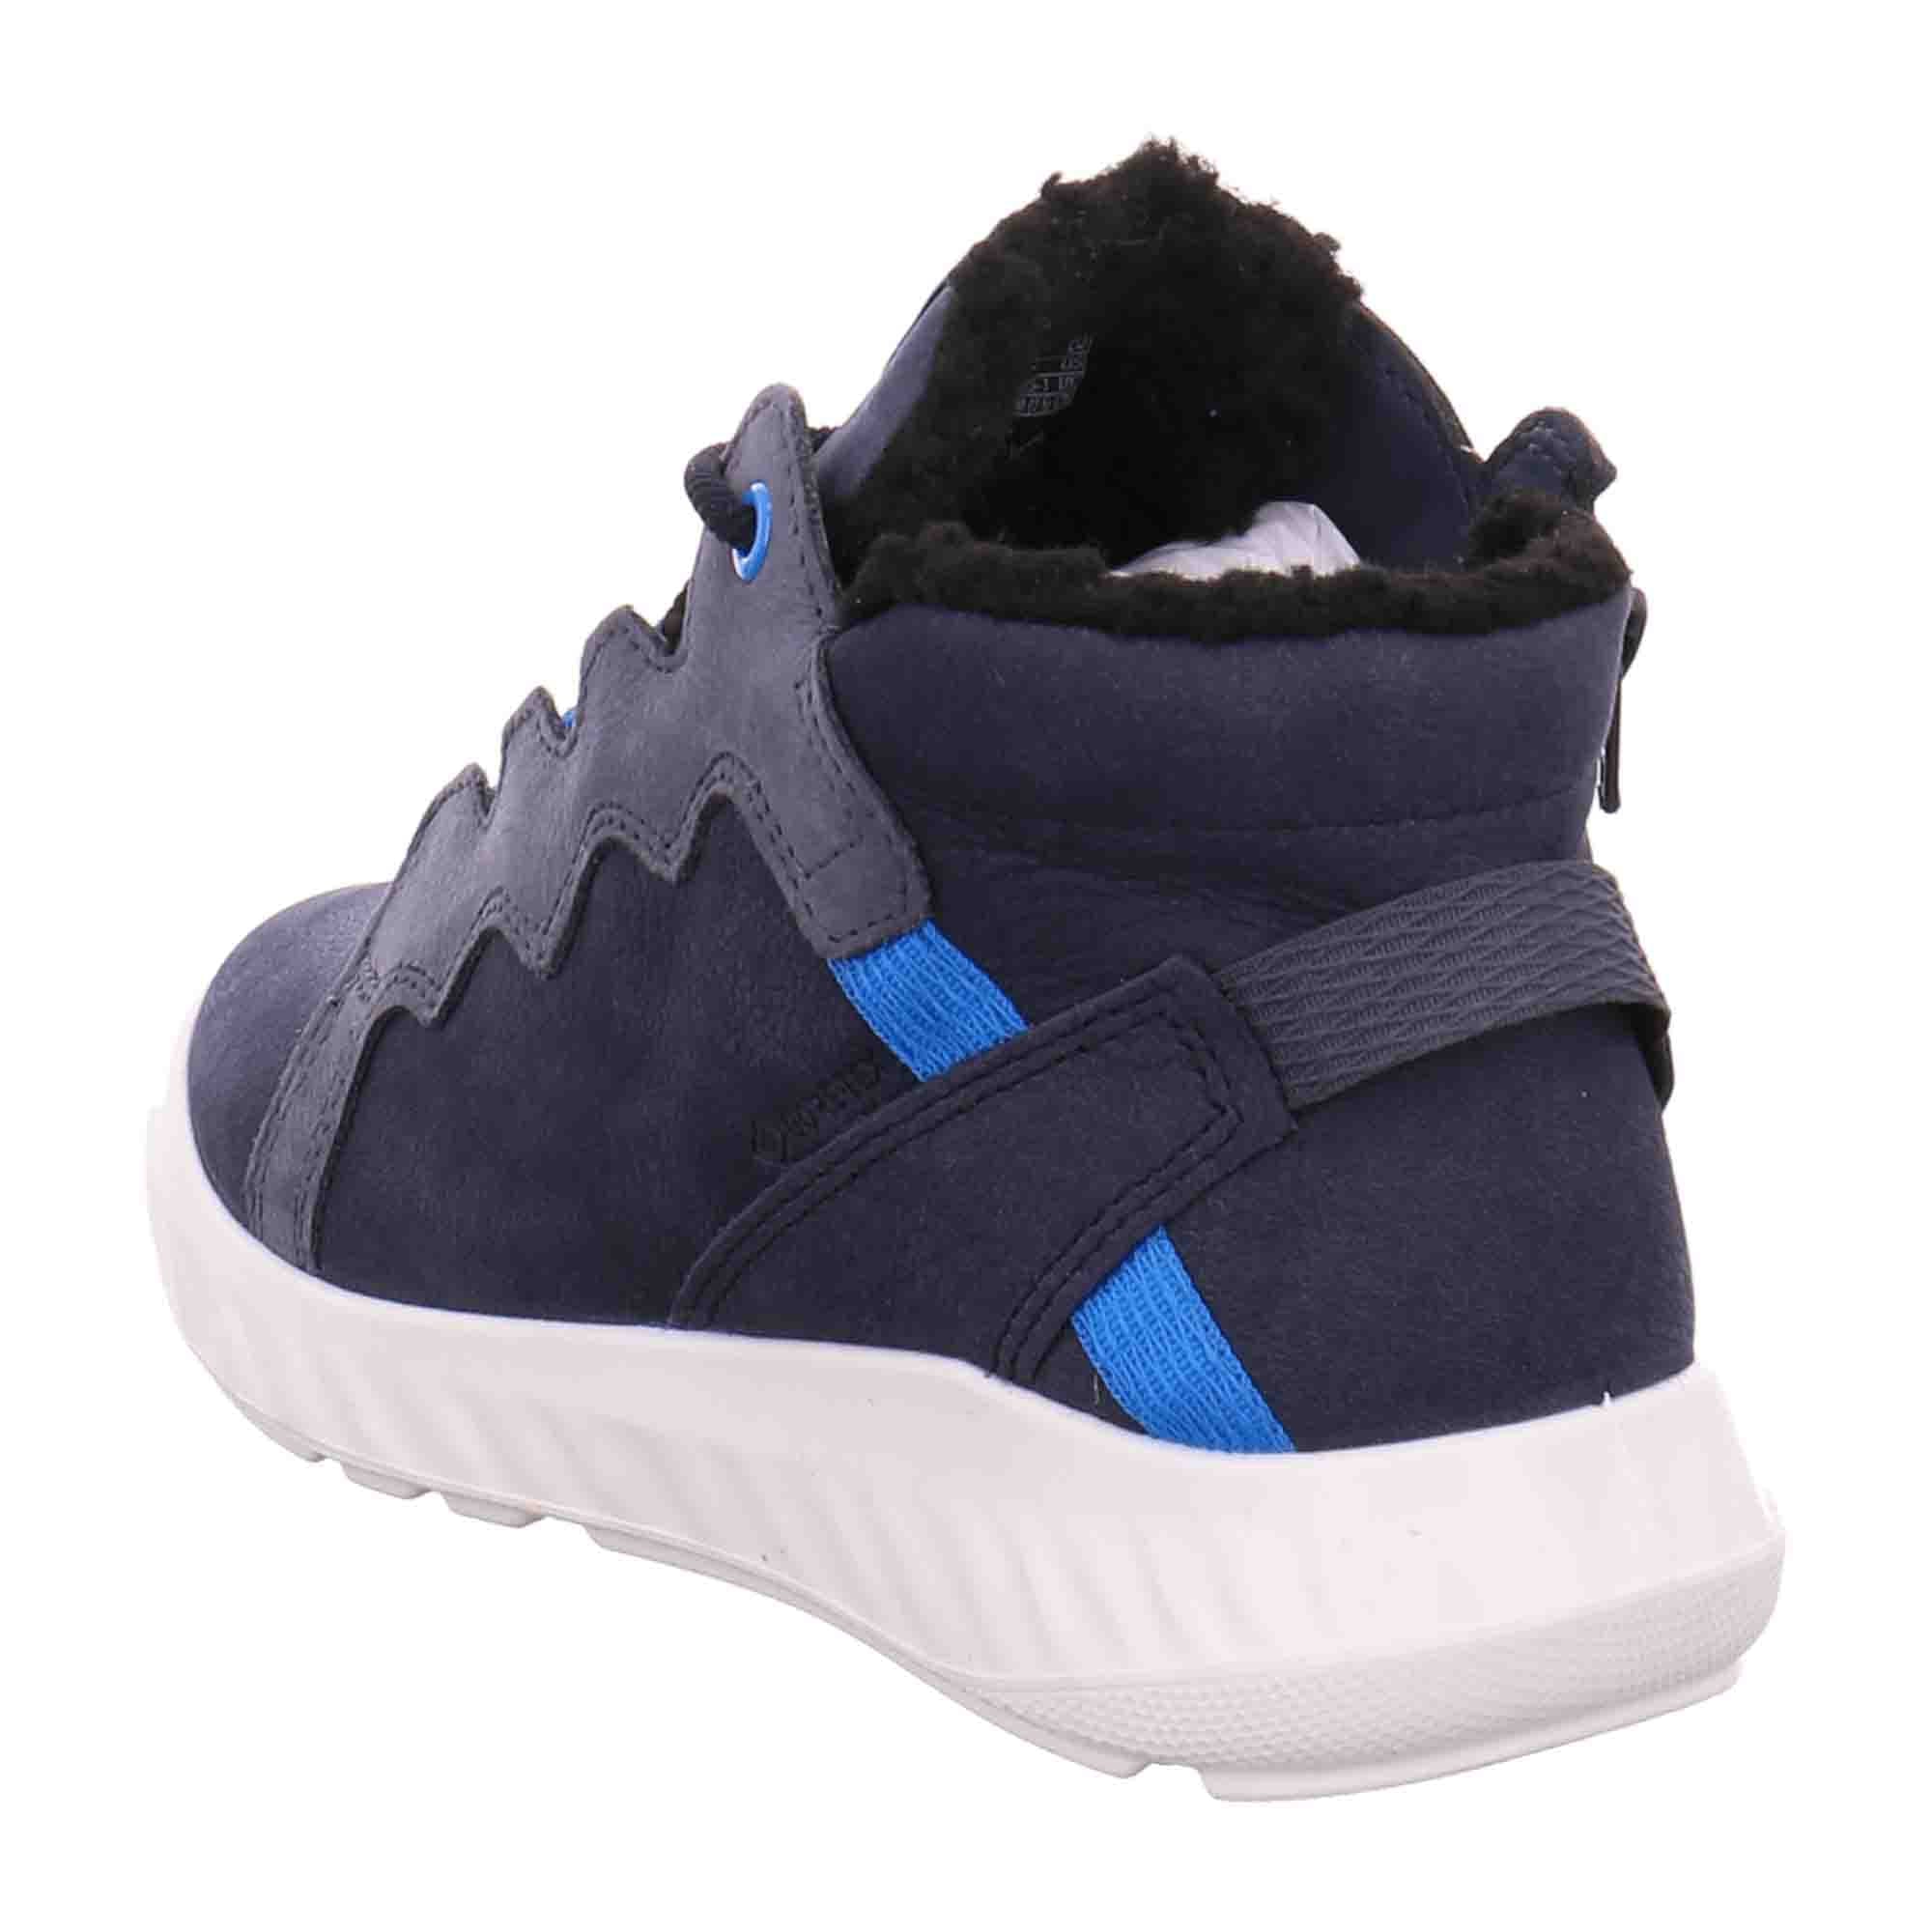 Ecco Kids Blue Shoes for Children - Durable & Stylish